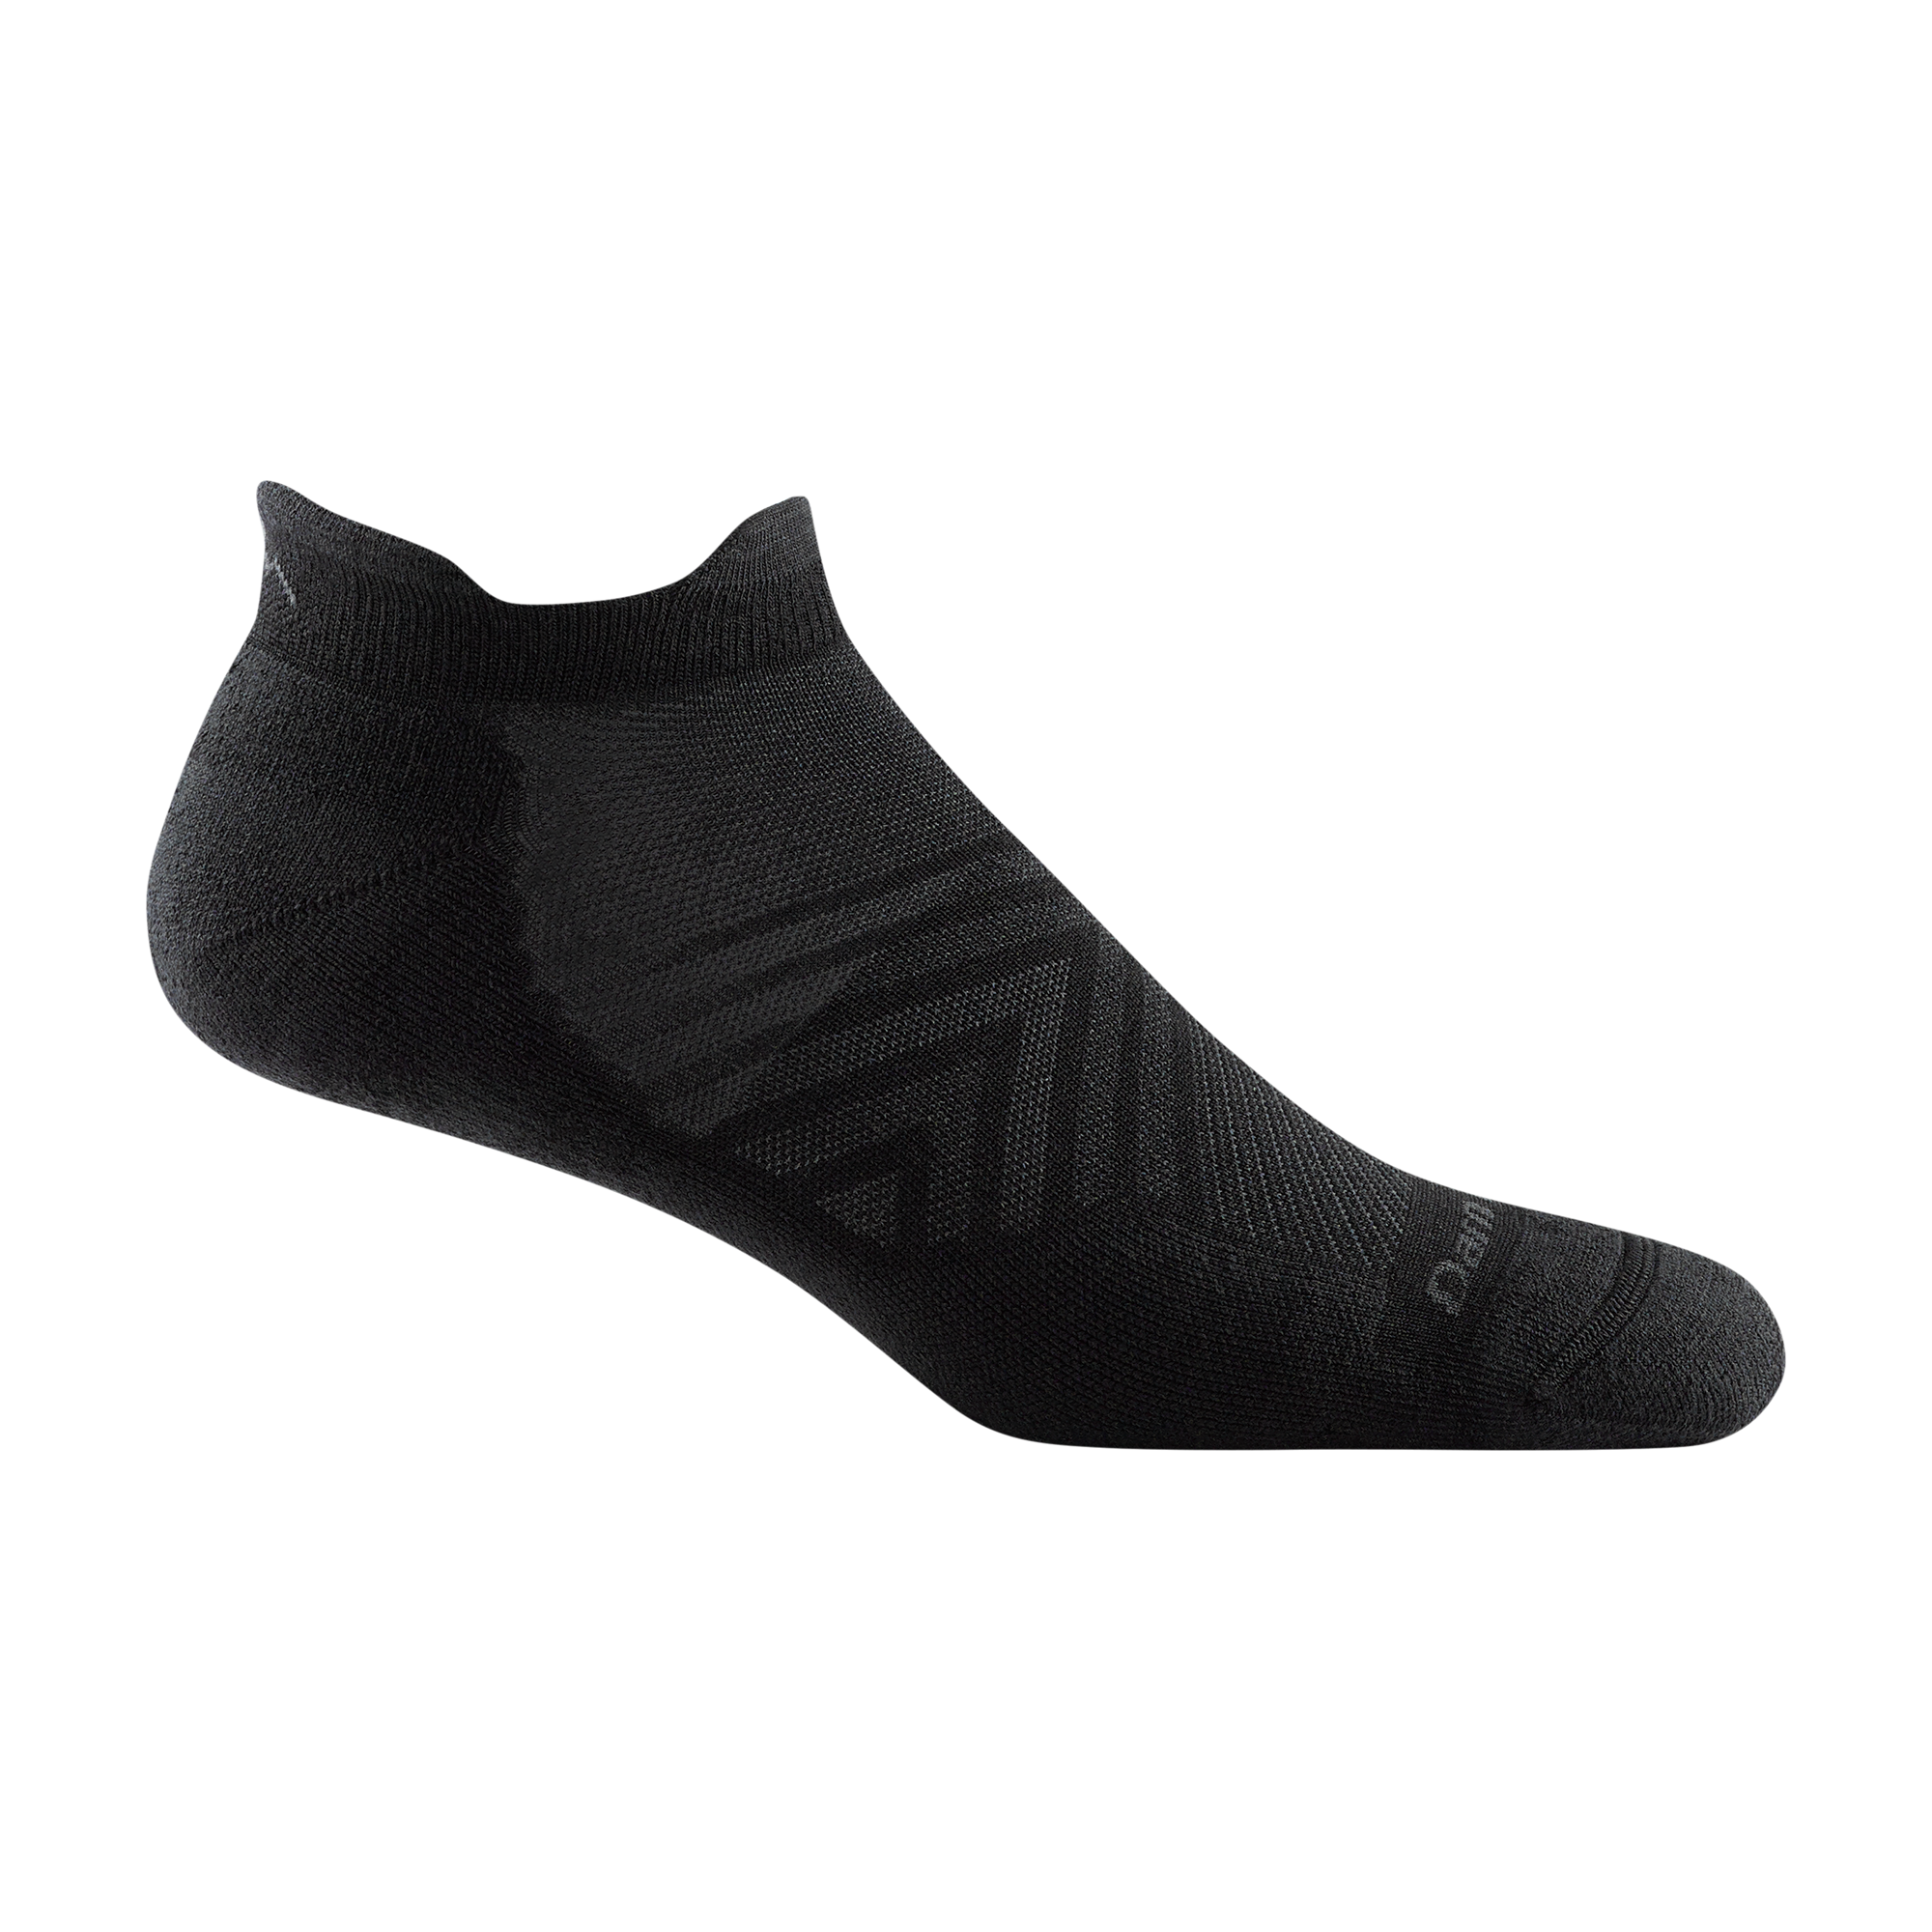 1039 men's no show tab running sock in black with gray darn tough signature on forefoot